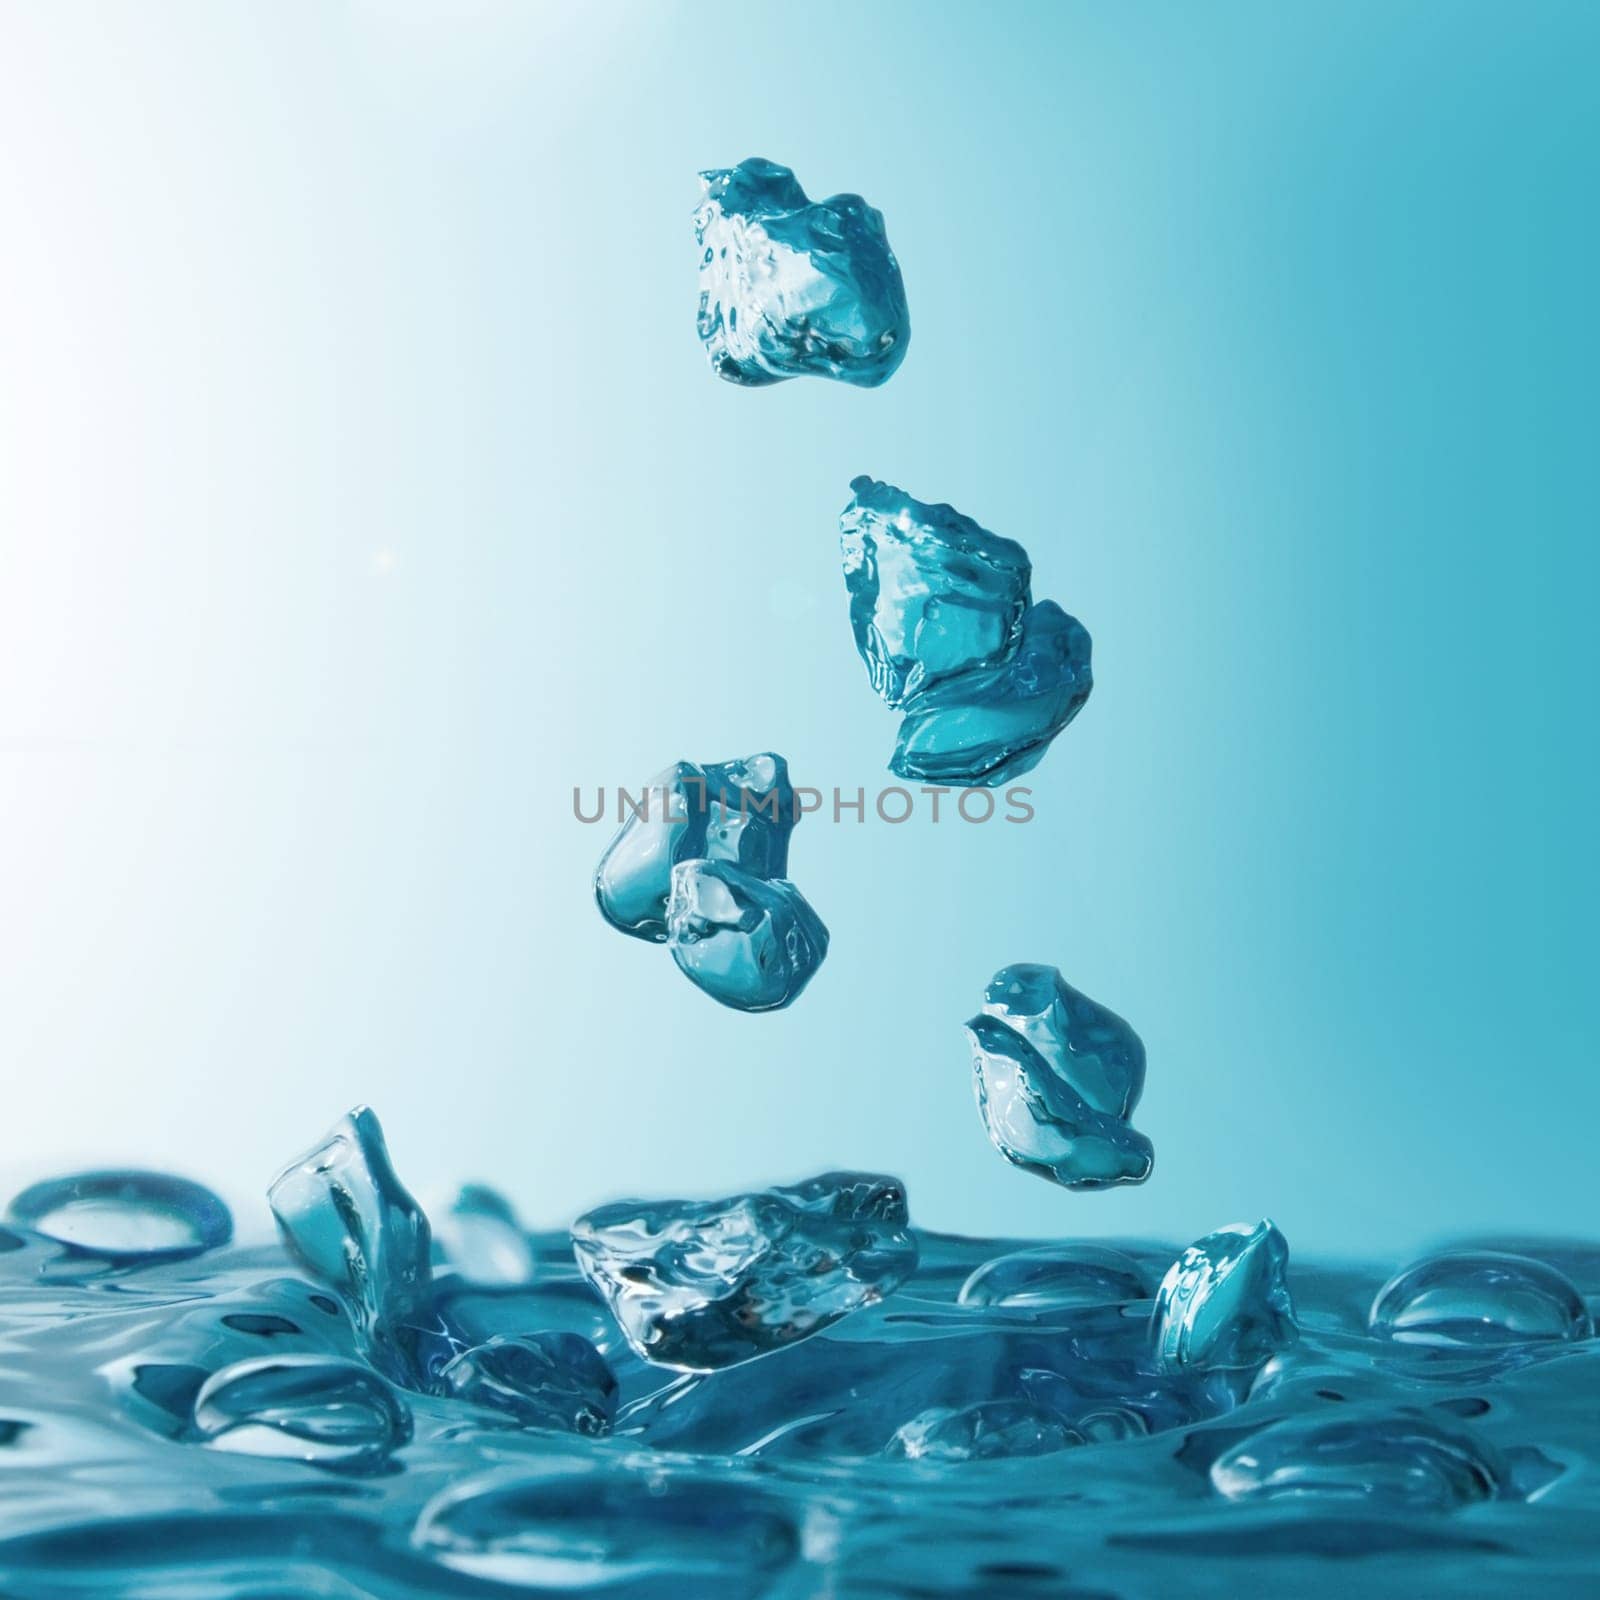 aqua art - water abstract backgrounds styled concept, elegant visuals